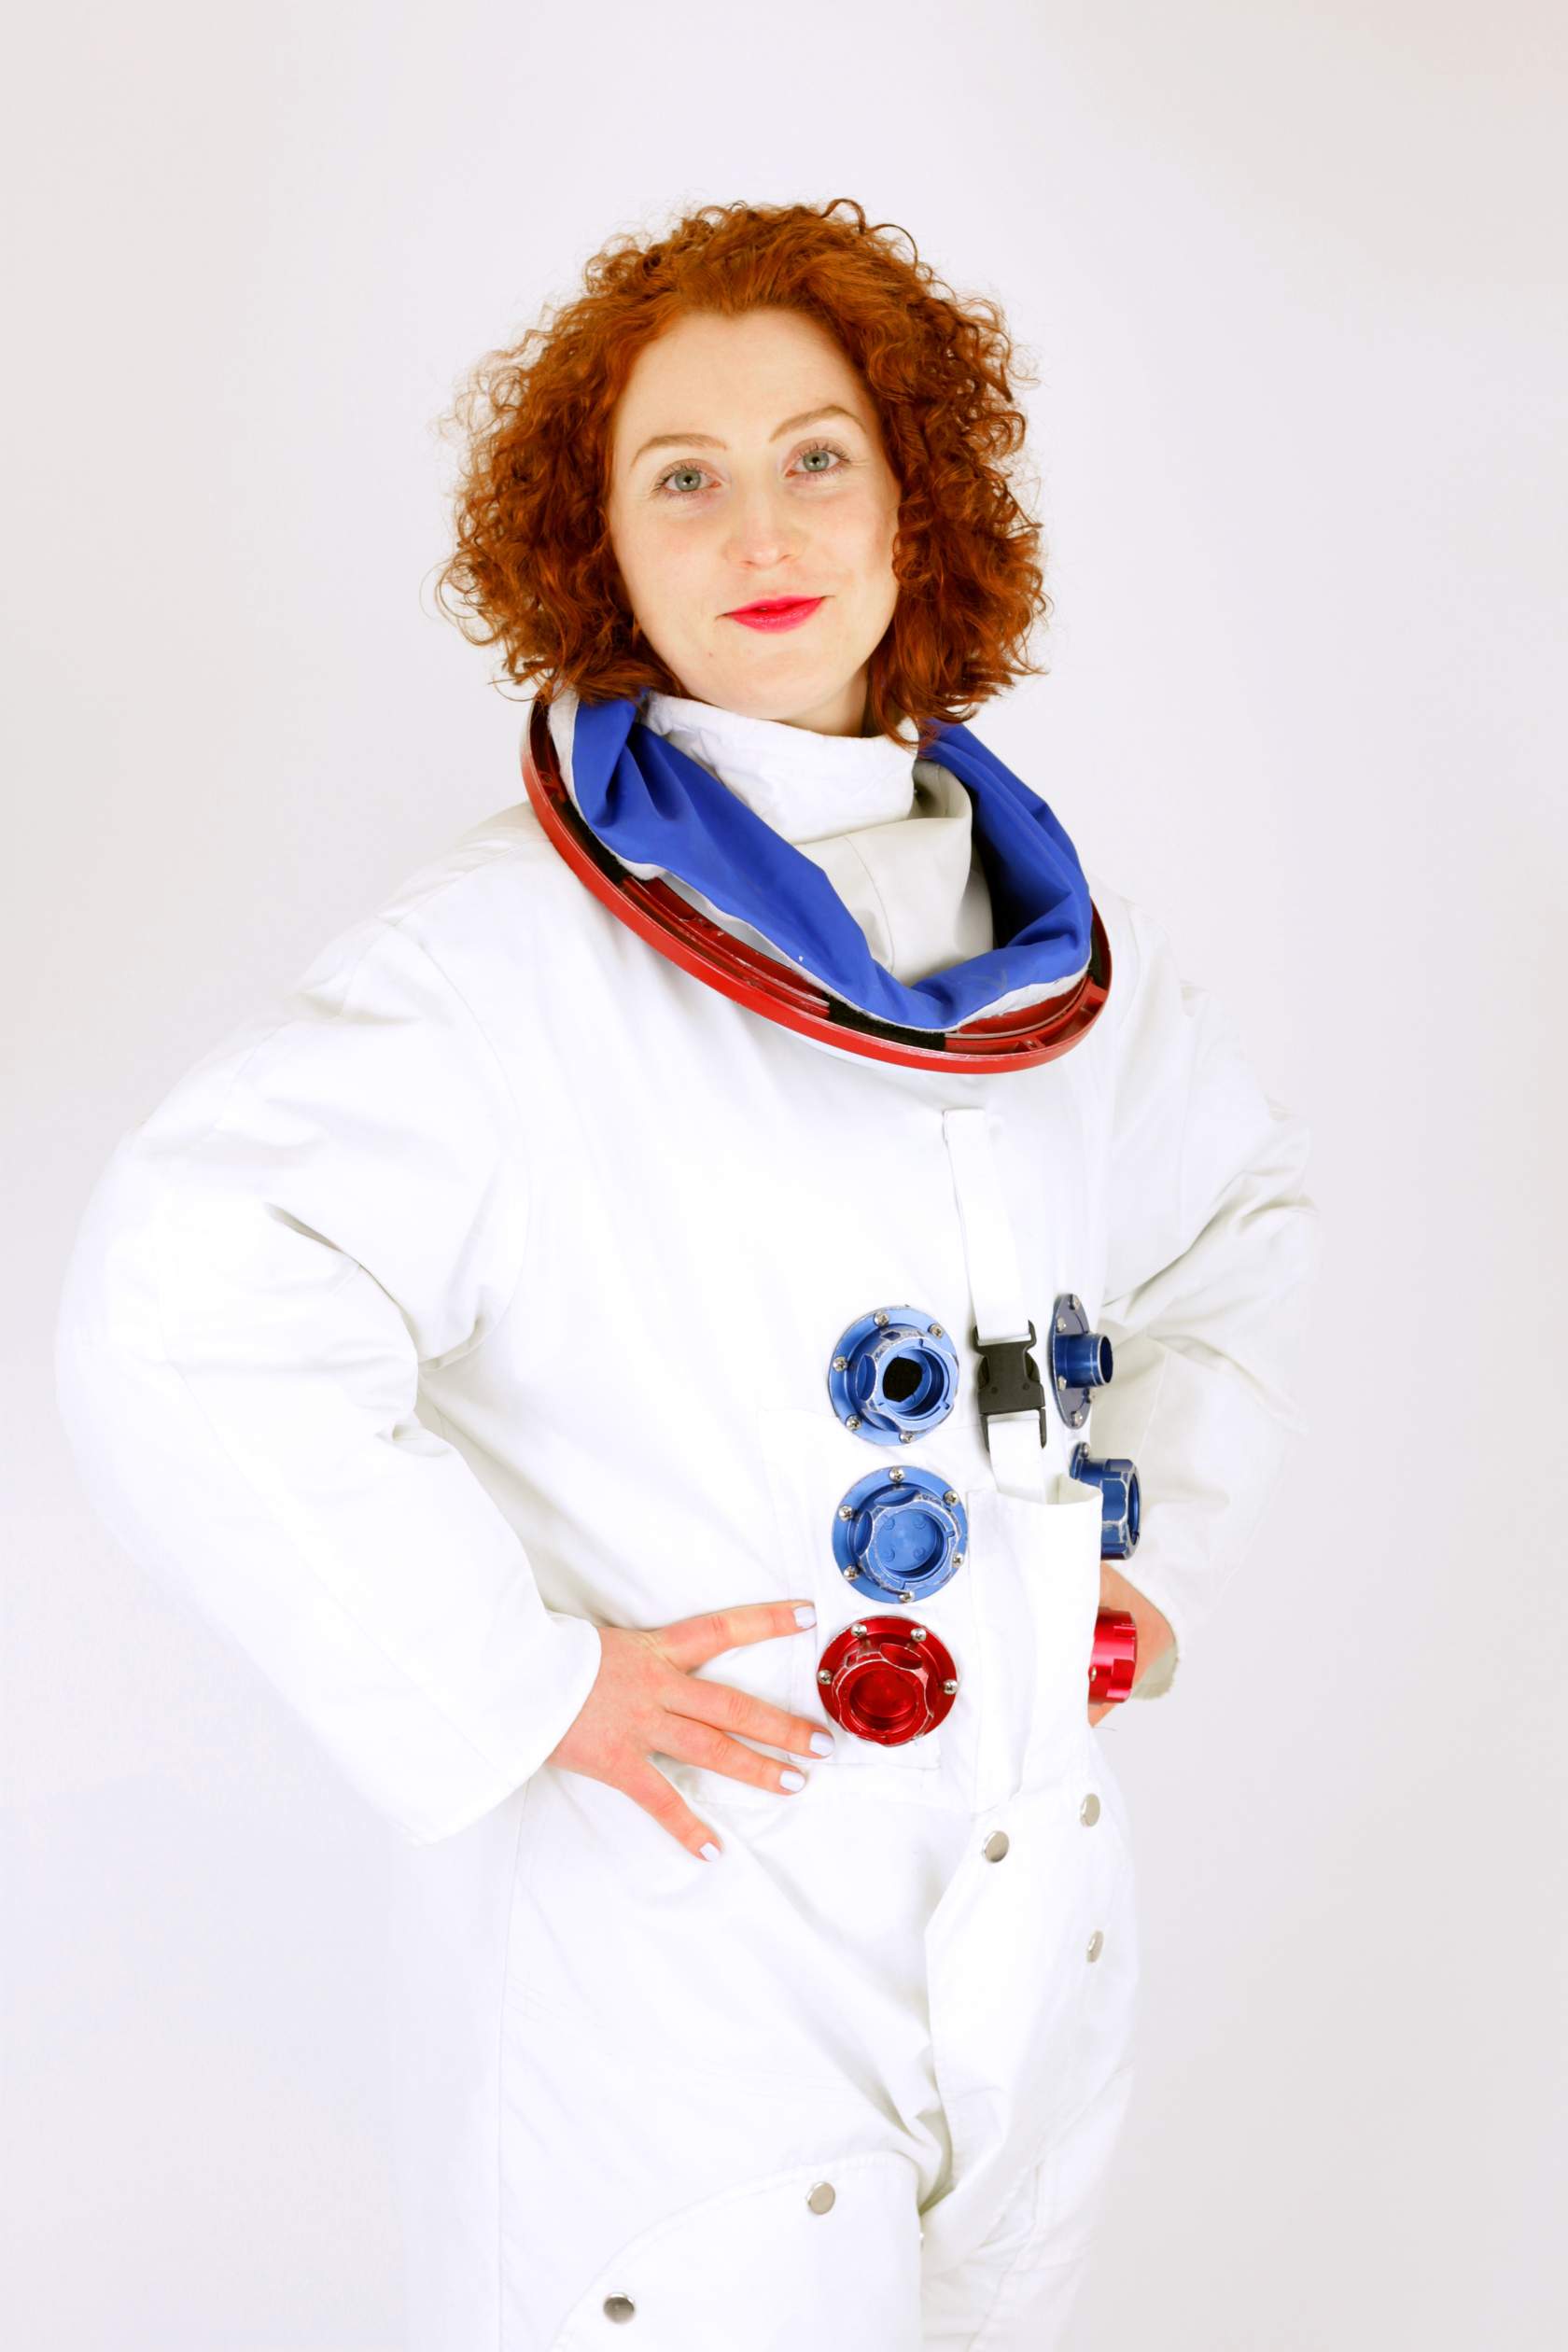 A woman posing for a photo in an astronaut suit.